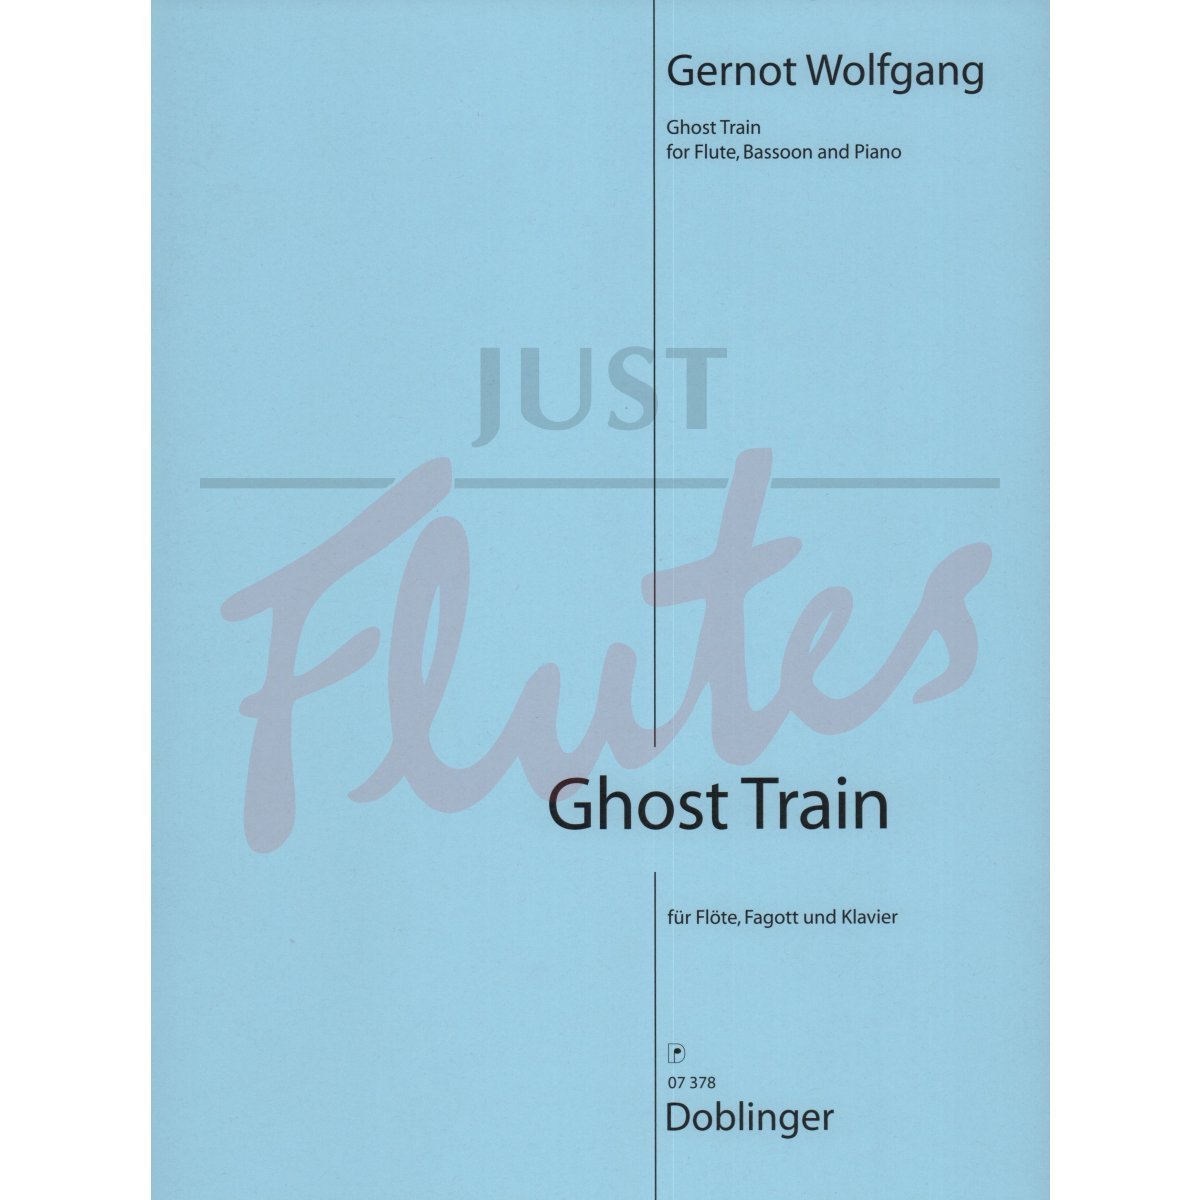 Ghost Train for Flute, Bassoon and Piano